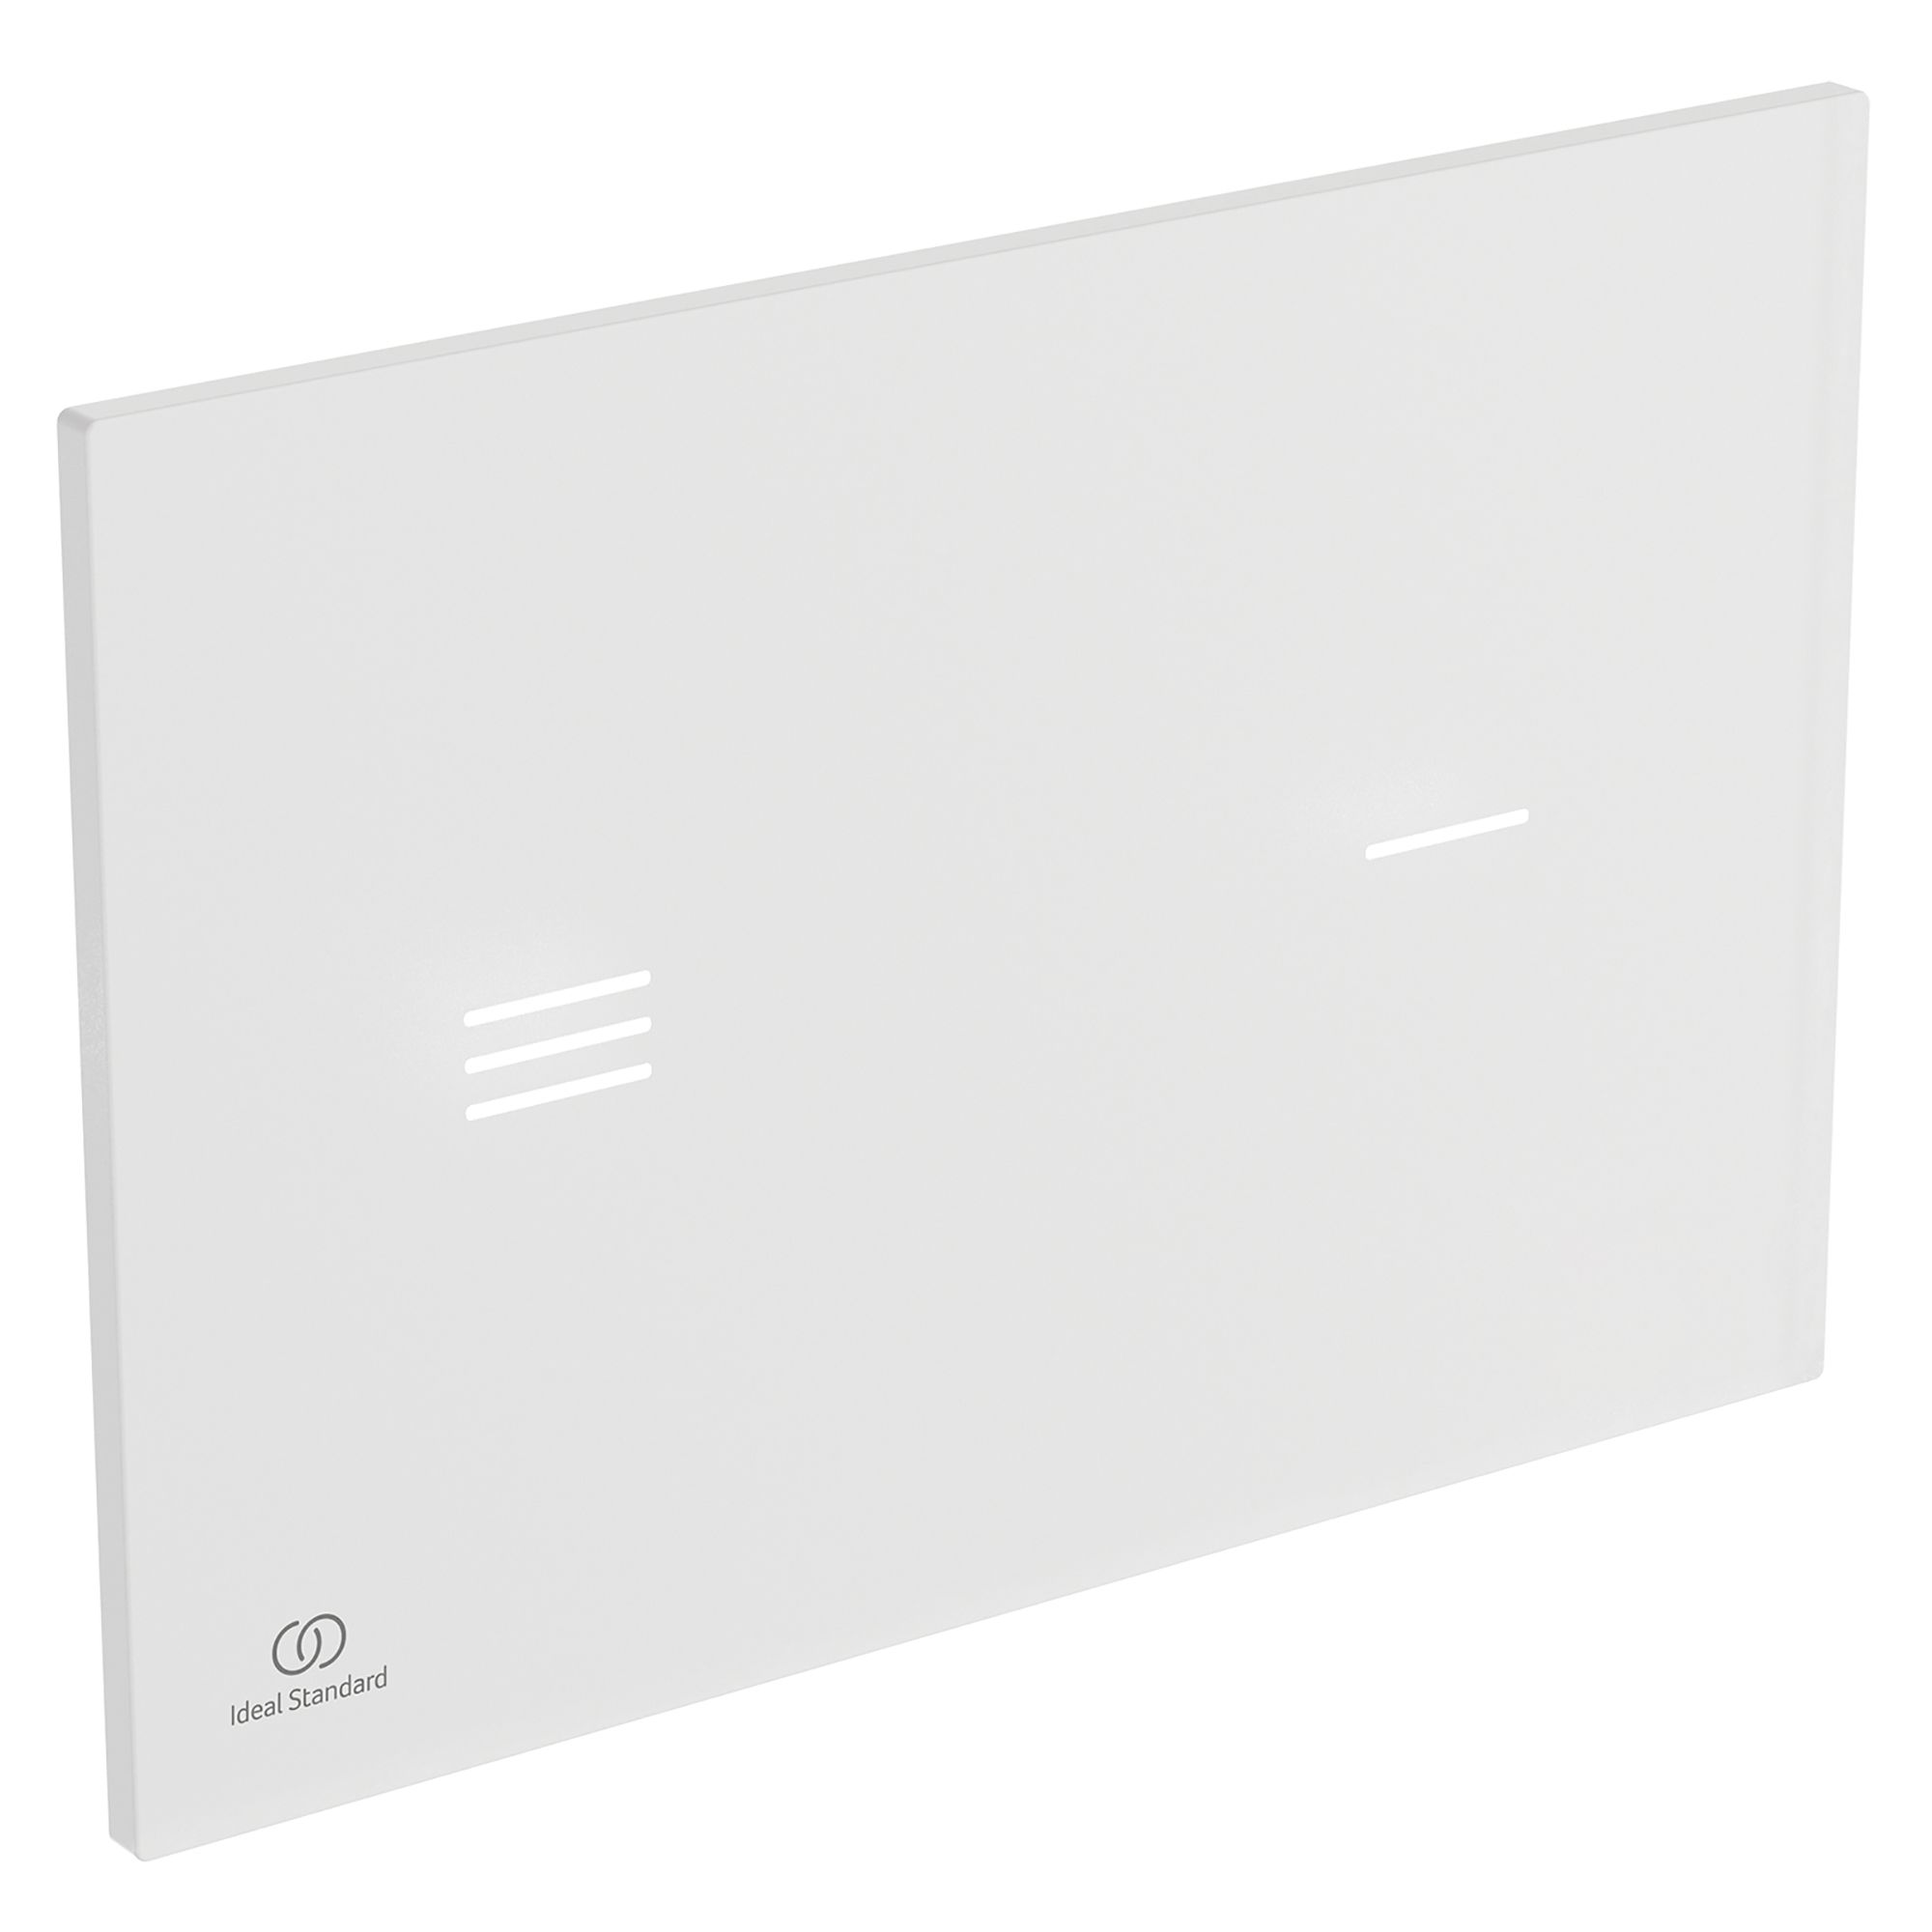 Ideal Standard Symfo NT1 electronic White Wall-mounted Dual Flushing plate with No-touch activation (H)220mm (W)150mm